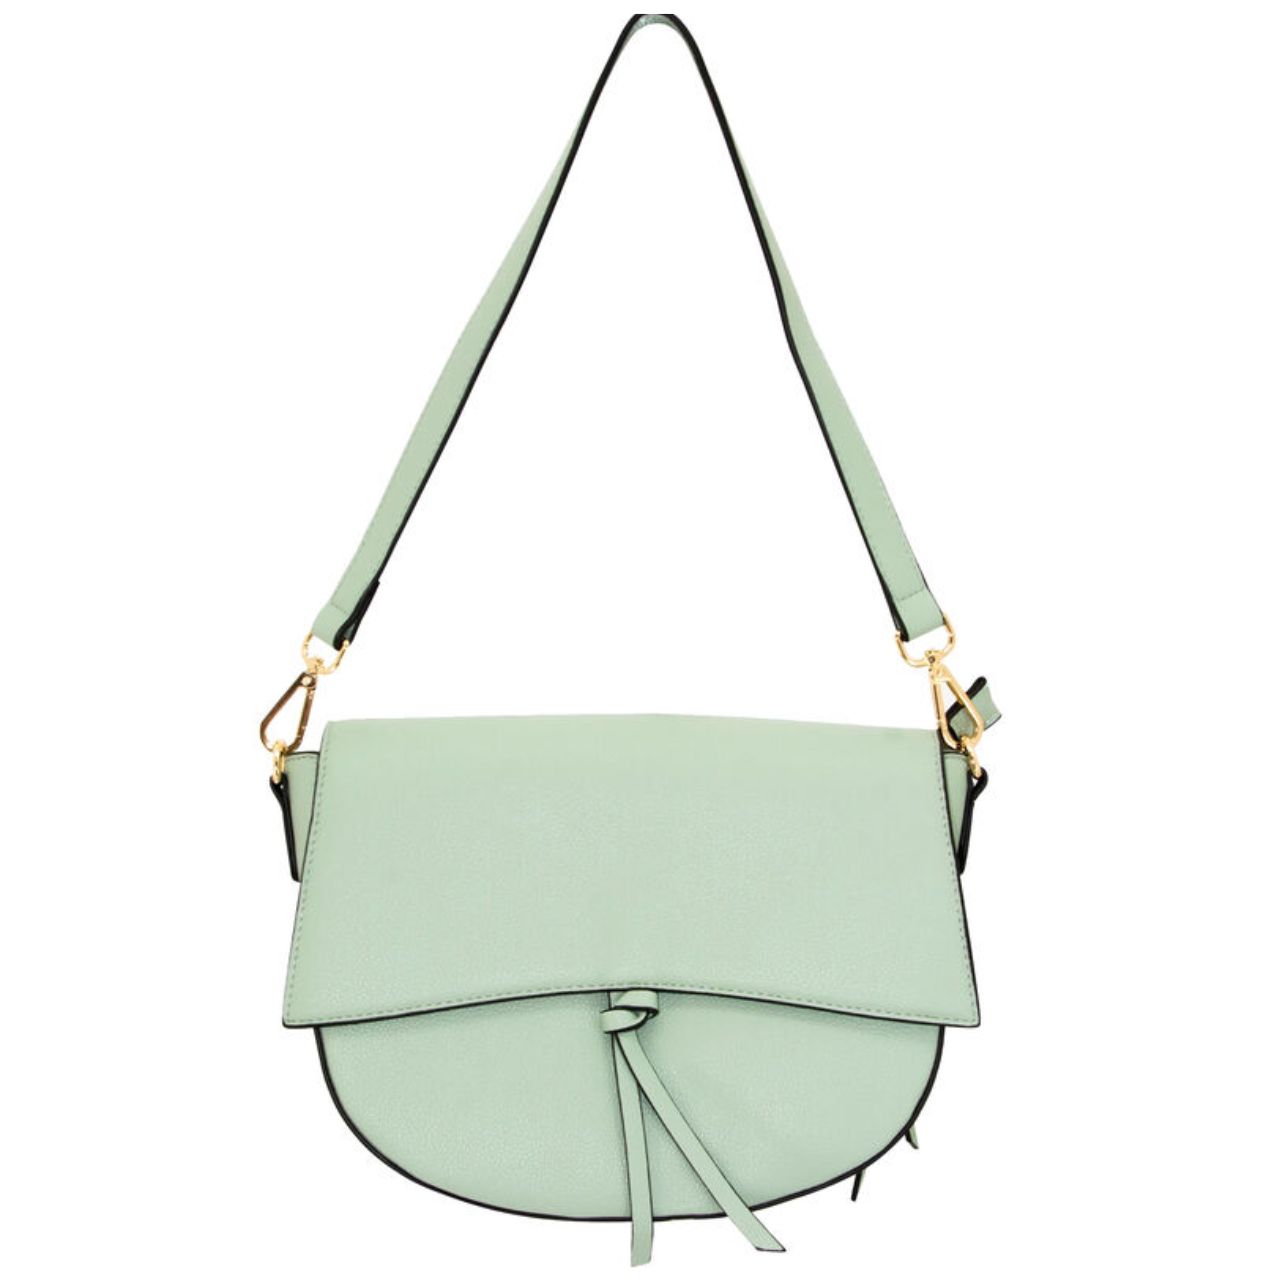 Cameleon "Zoey" Concealed Carry Purse